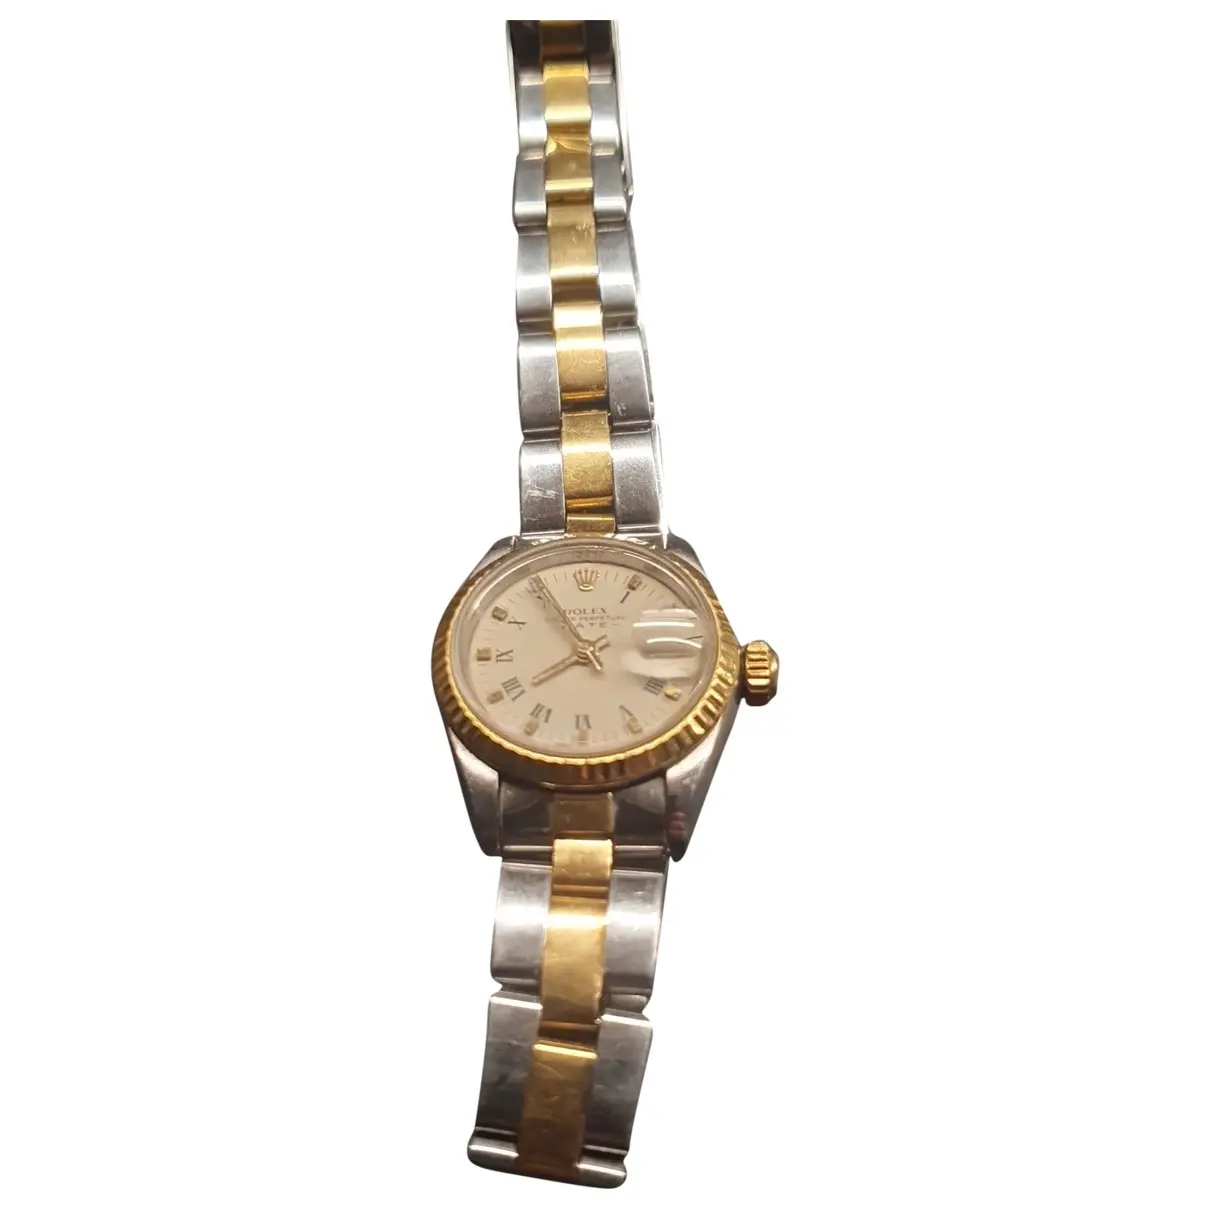 Lady Oyster Perpetual 24mm yellow gold watch